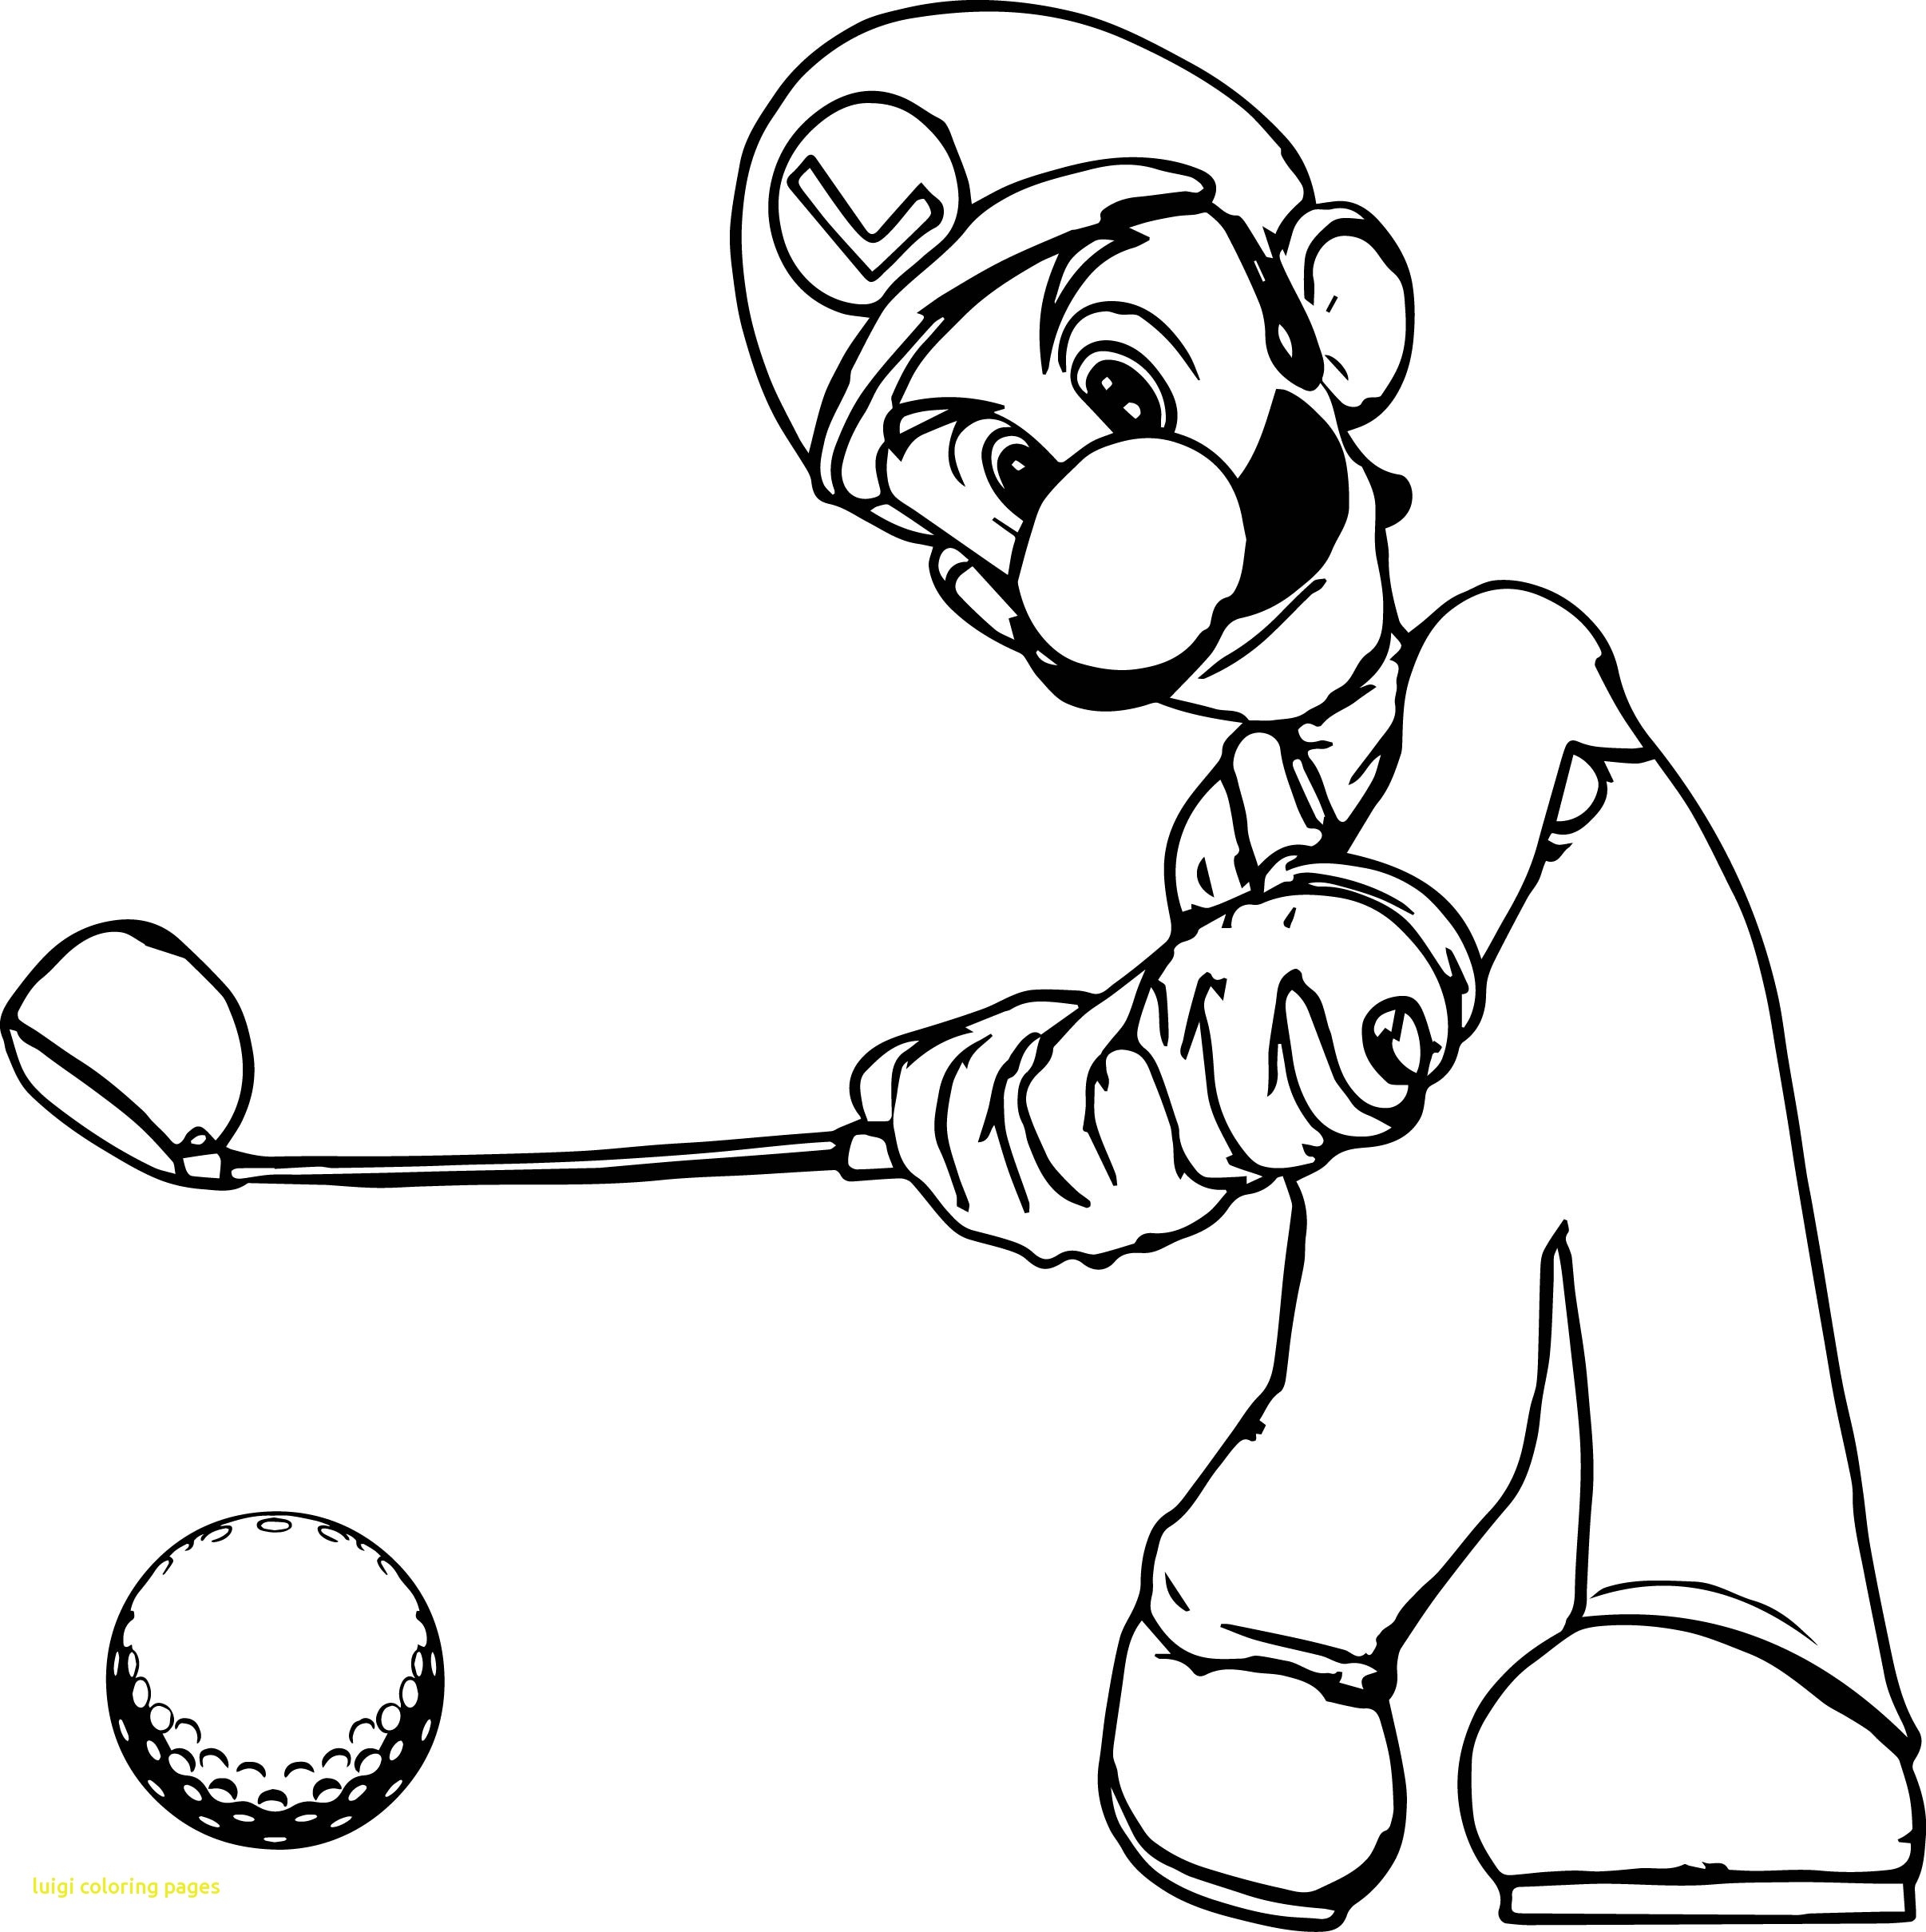 baby-luigi-coloring-pages-at-getcolorings-free-printable-colorings-pages-to-print-and-color